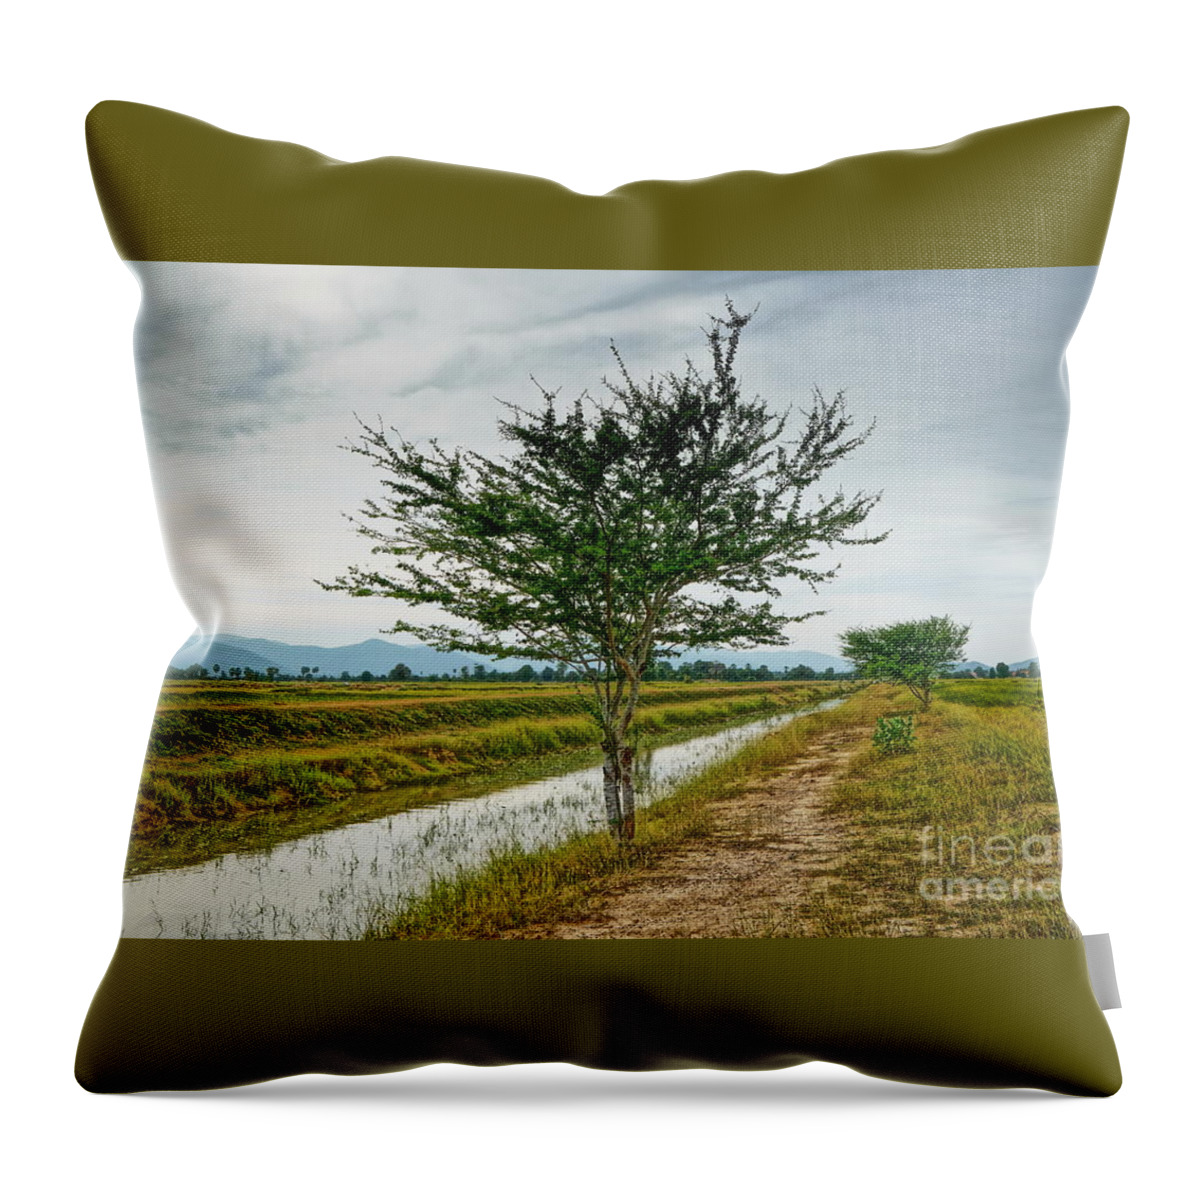 Water Throw Pillow featuring the photograph Green Tree by Arik S Mintorogo